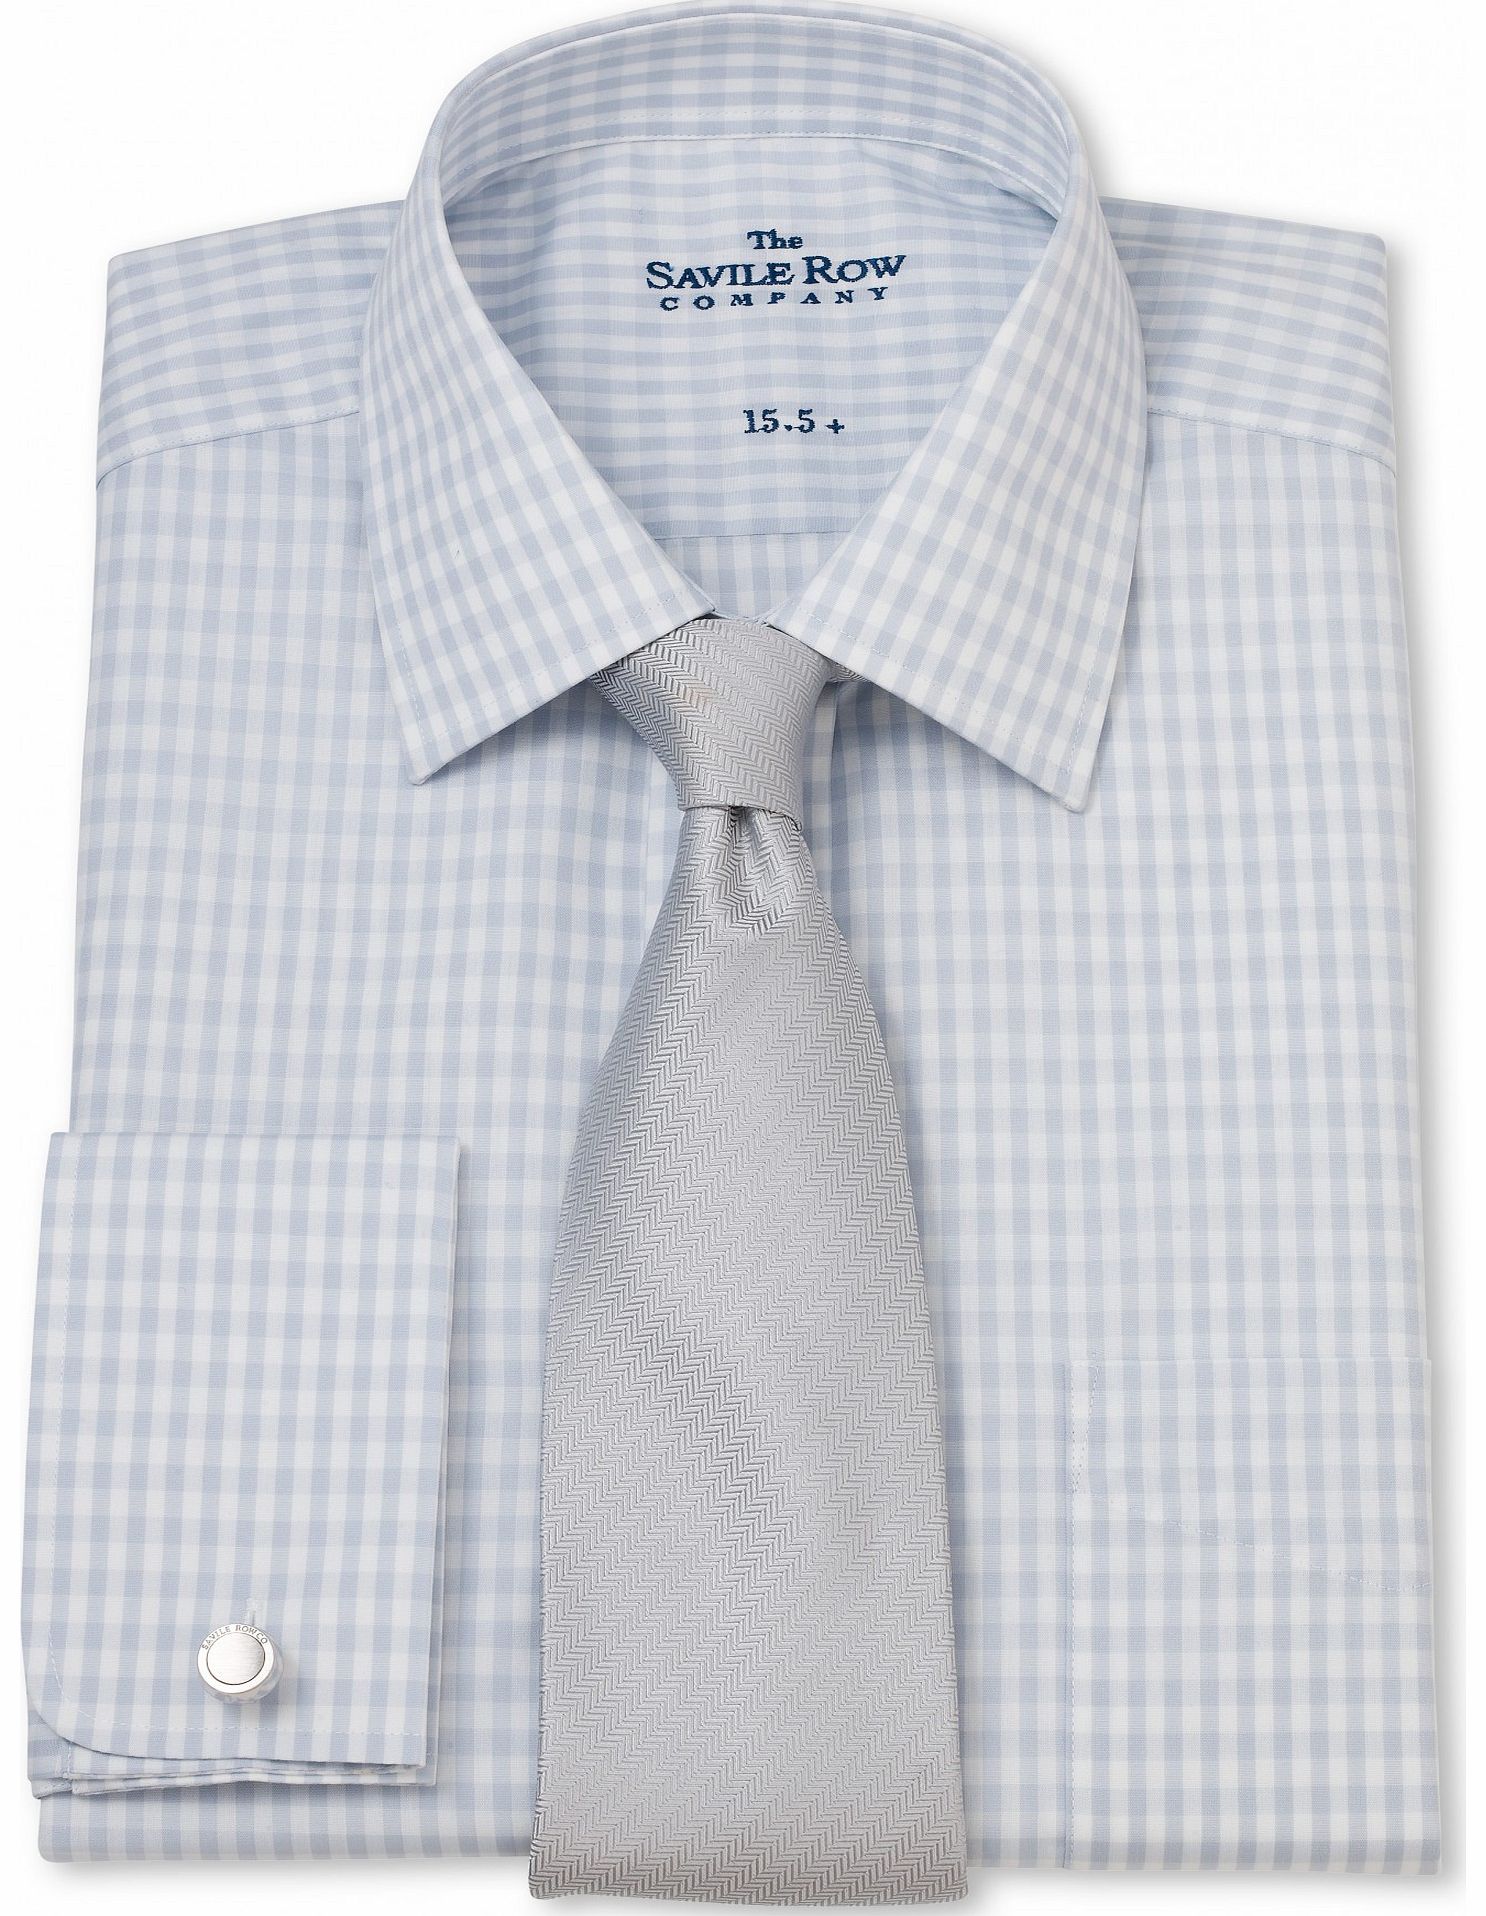 Savile Row Company Grey White Gingham Check Classic Fit Shirt 18